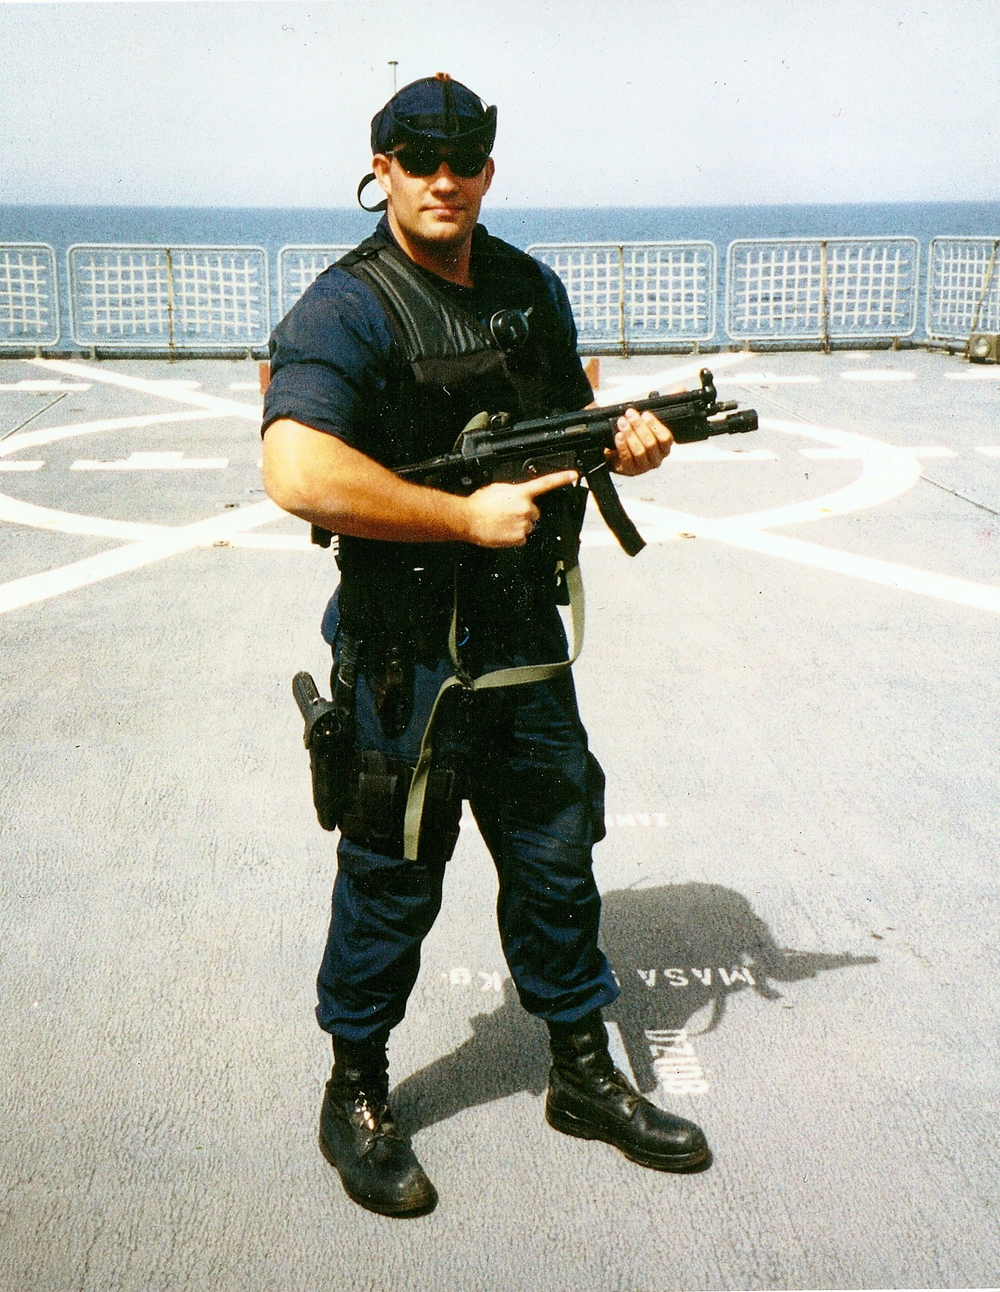 Petty Officer 3rd Class Nathan Bruckenthal, who made the ultimate sacrifice during a boarding operation as member of a Coast Guard LEDET team. (U.S. Coast Guard)